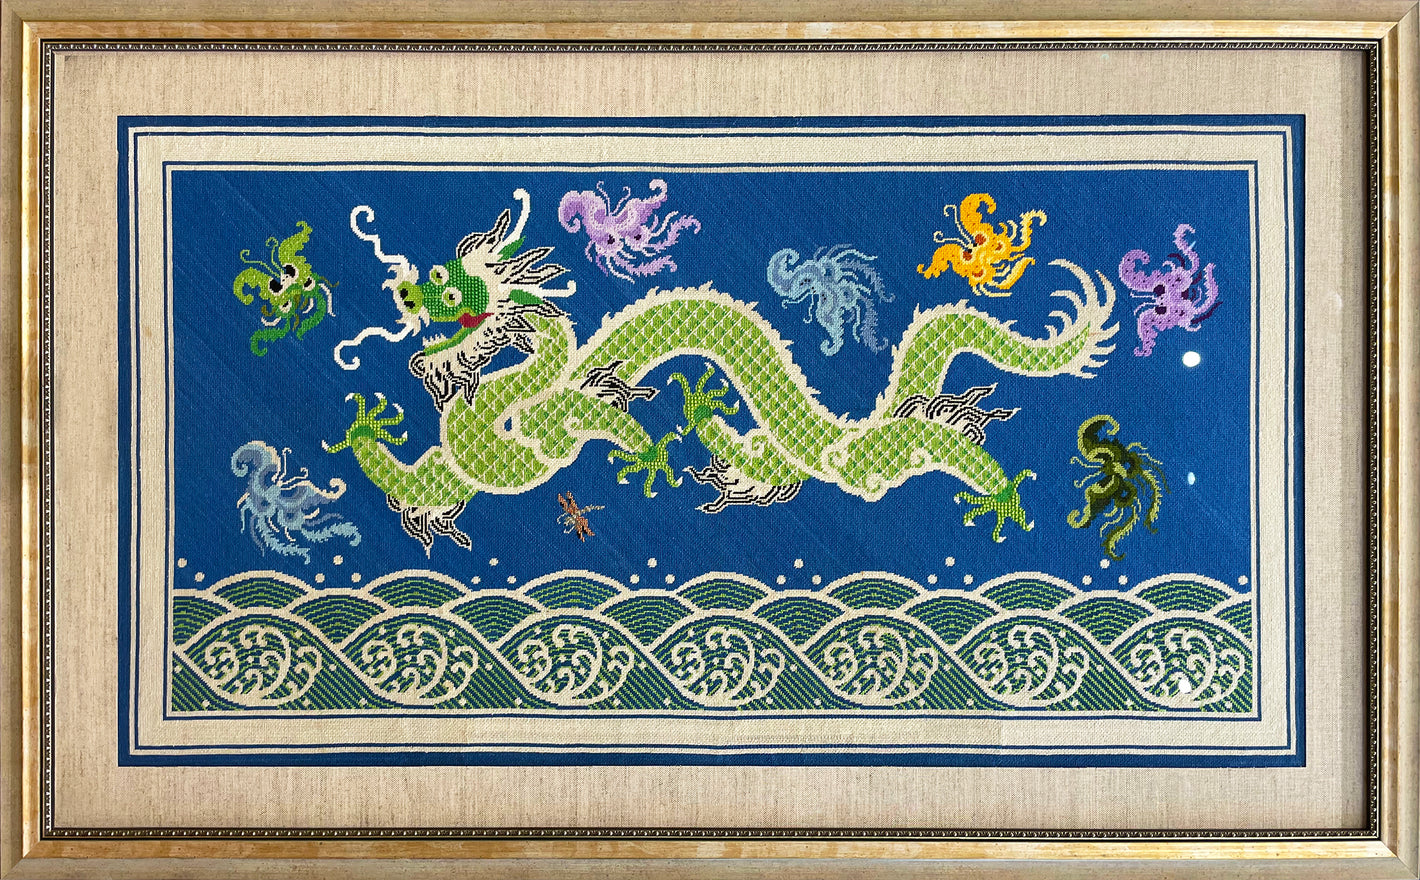 Large needlepoint of a dragon and fantastical creatures over a rolling sea framed in a gold frame with a black and gold fillet.